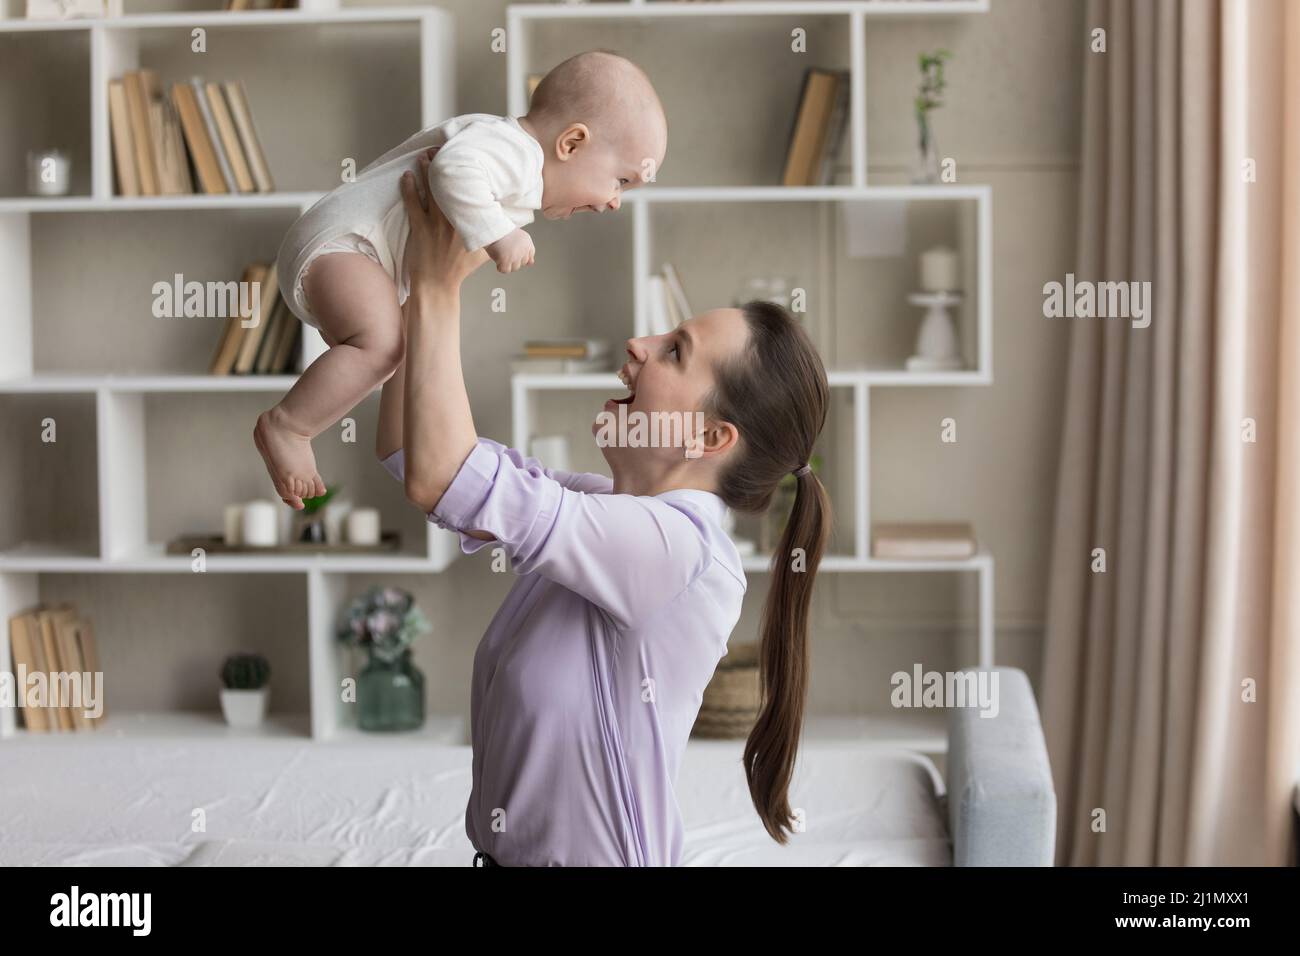 Smiling young mother lifting in air laughing adorable newborn baby. Stock Photo